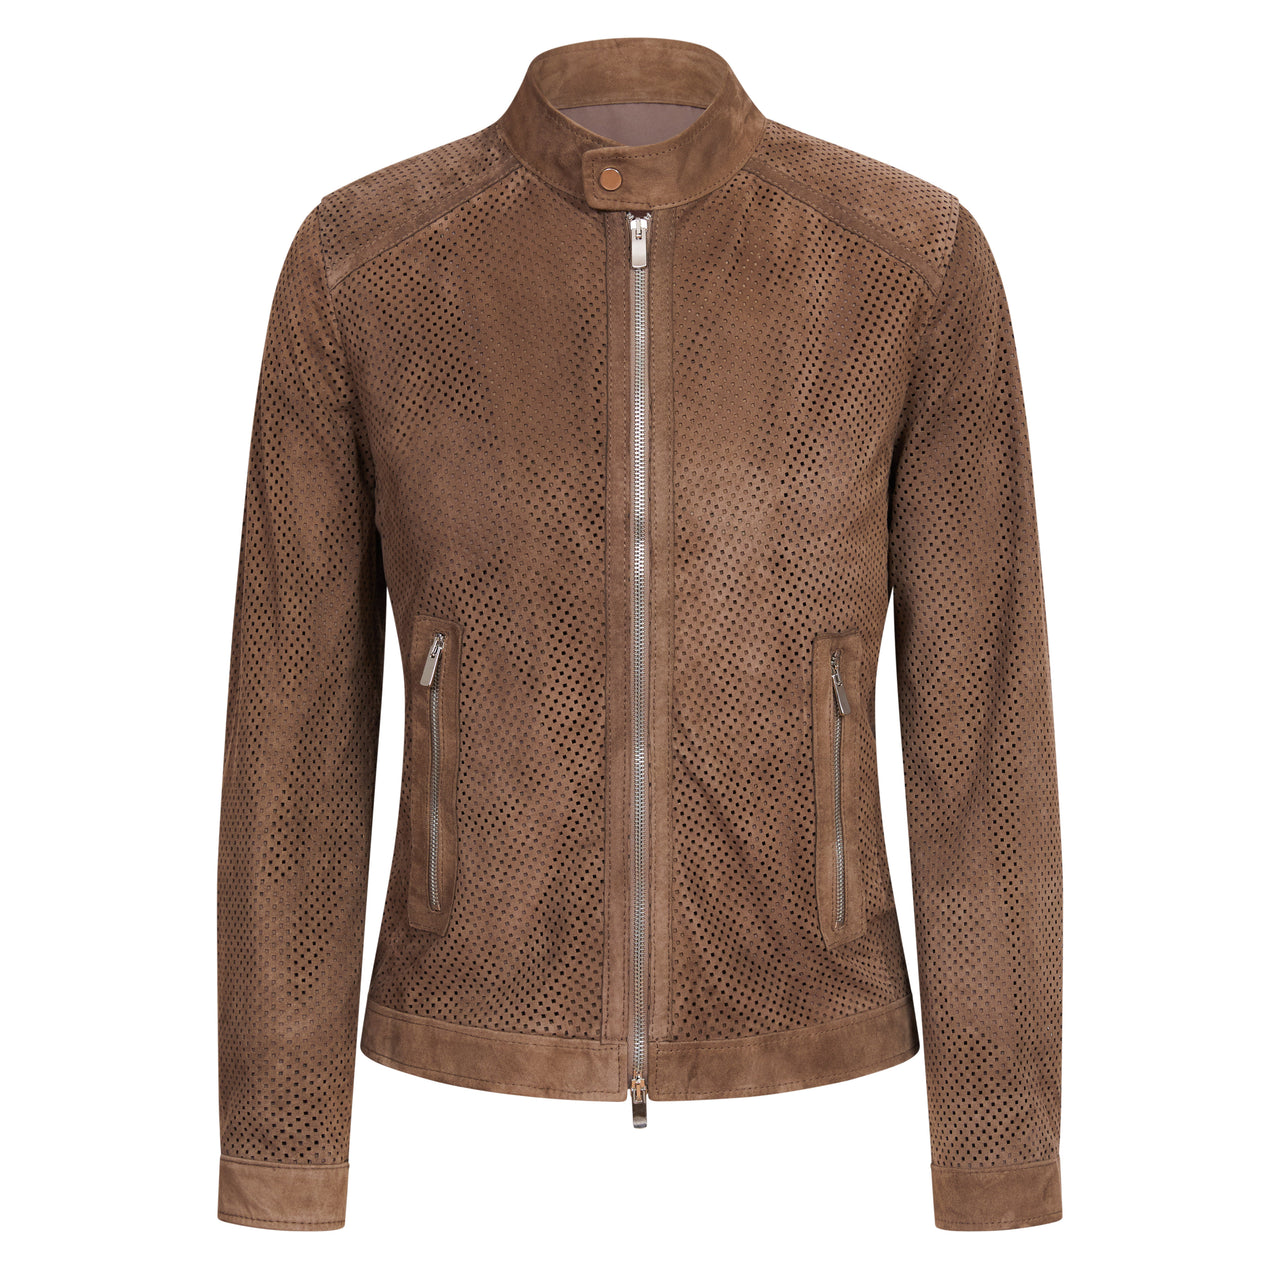 MCKINNON Perforated Suede Jacket BROWN/TAUPE